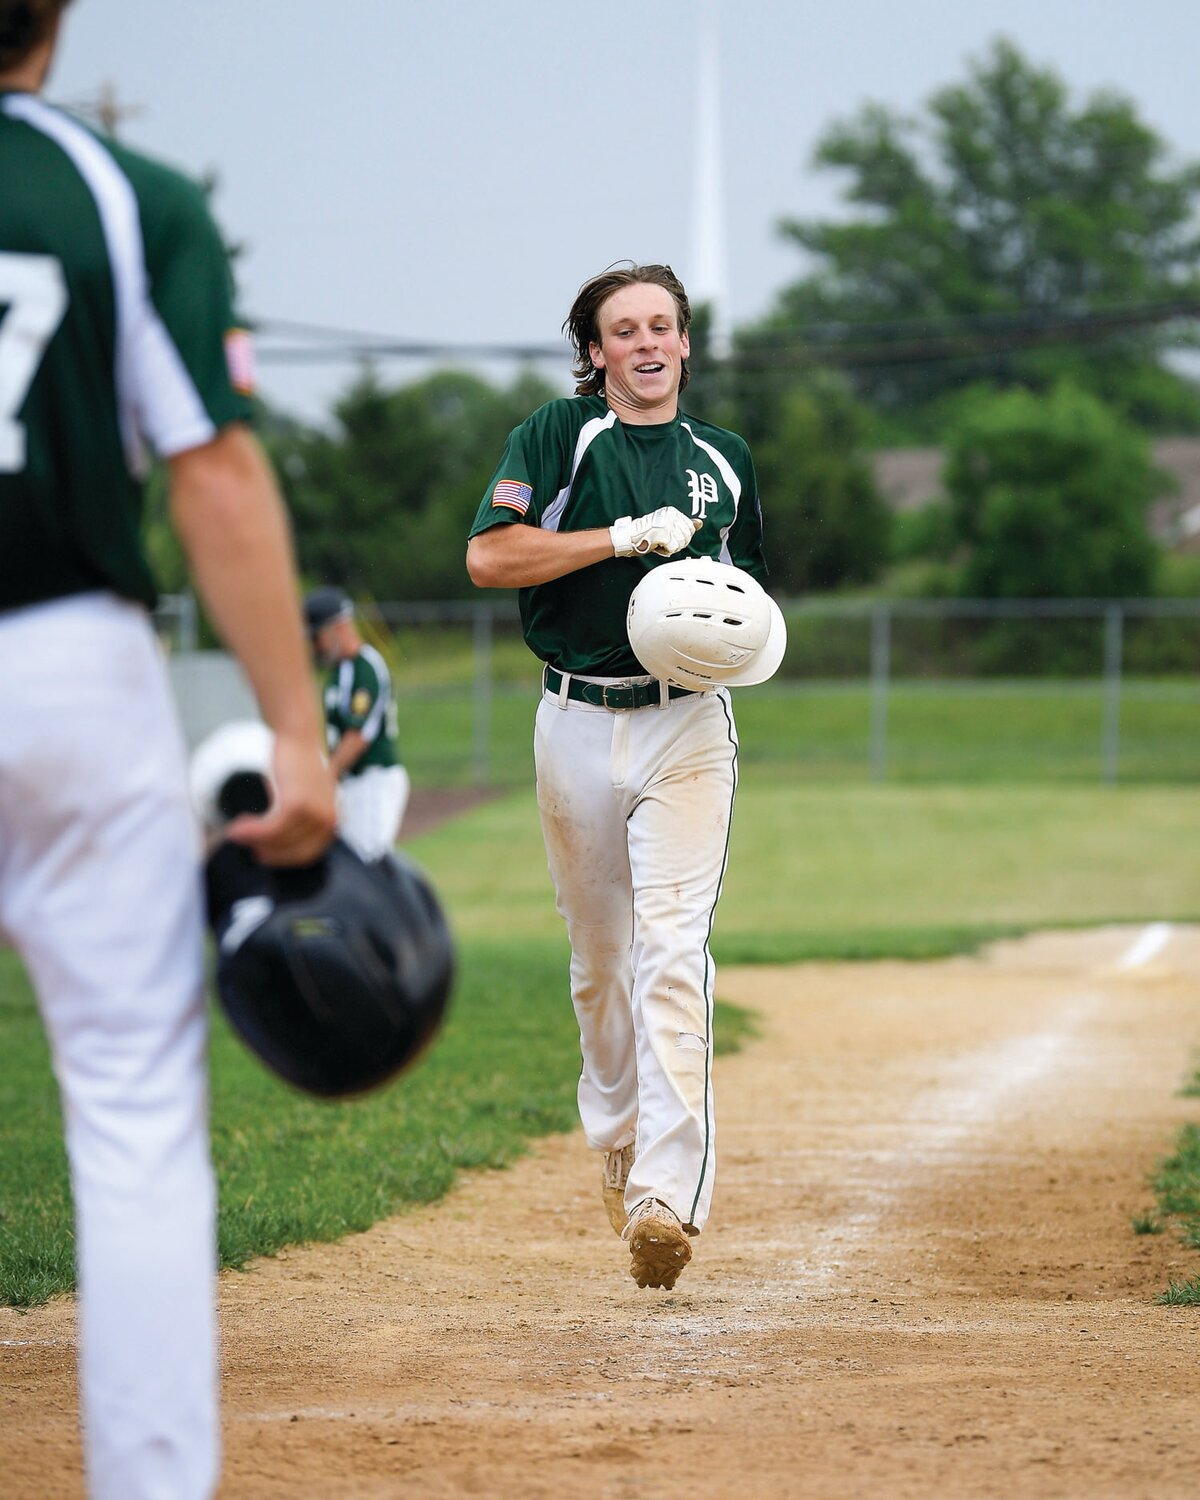 Pennridge’s Robbie Pliszka is greeted at home plate after hitting a grand slam in the fourth inning of Game 1 of a doubleheader with Nor-Gwyn.